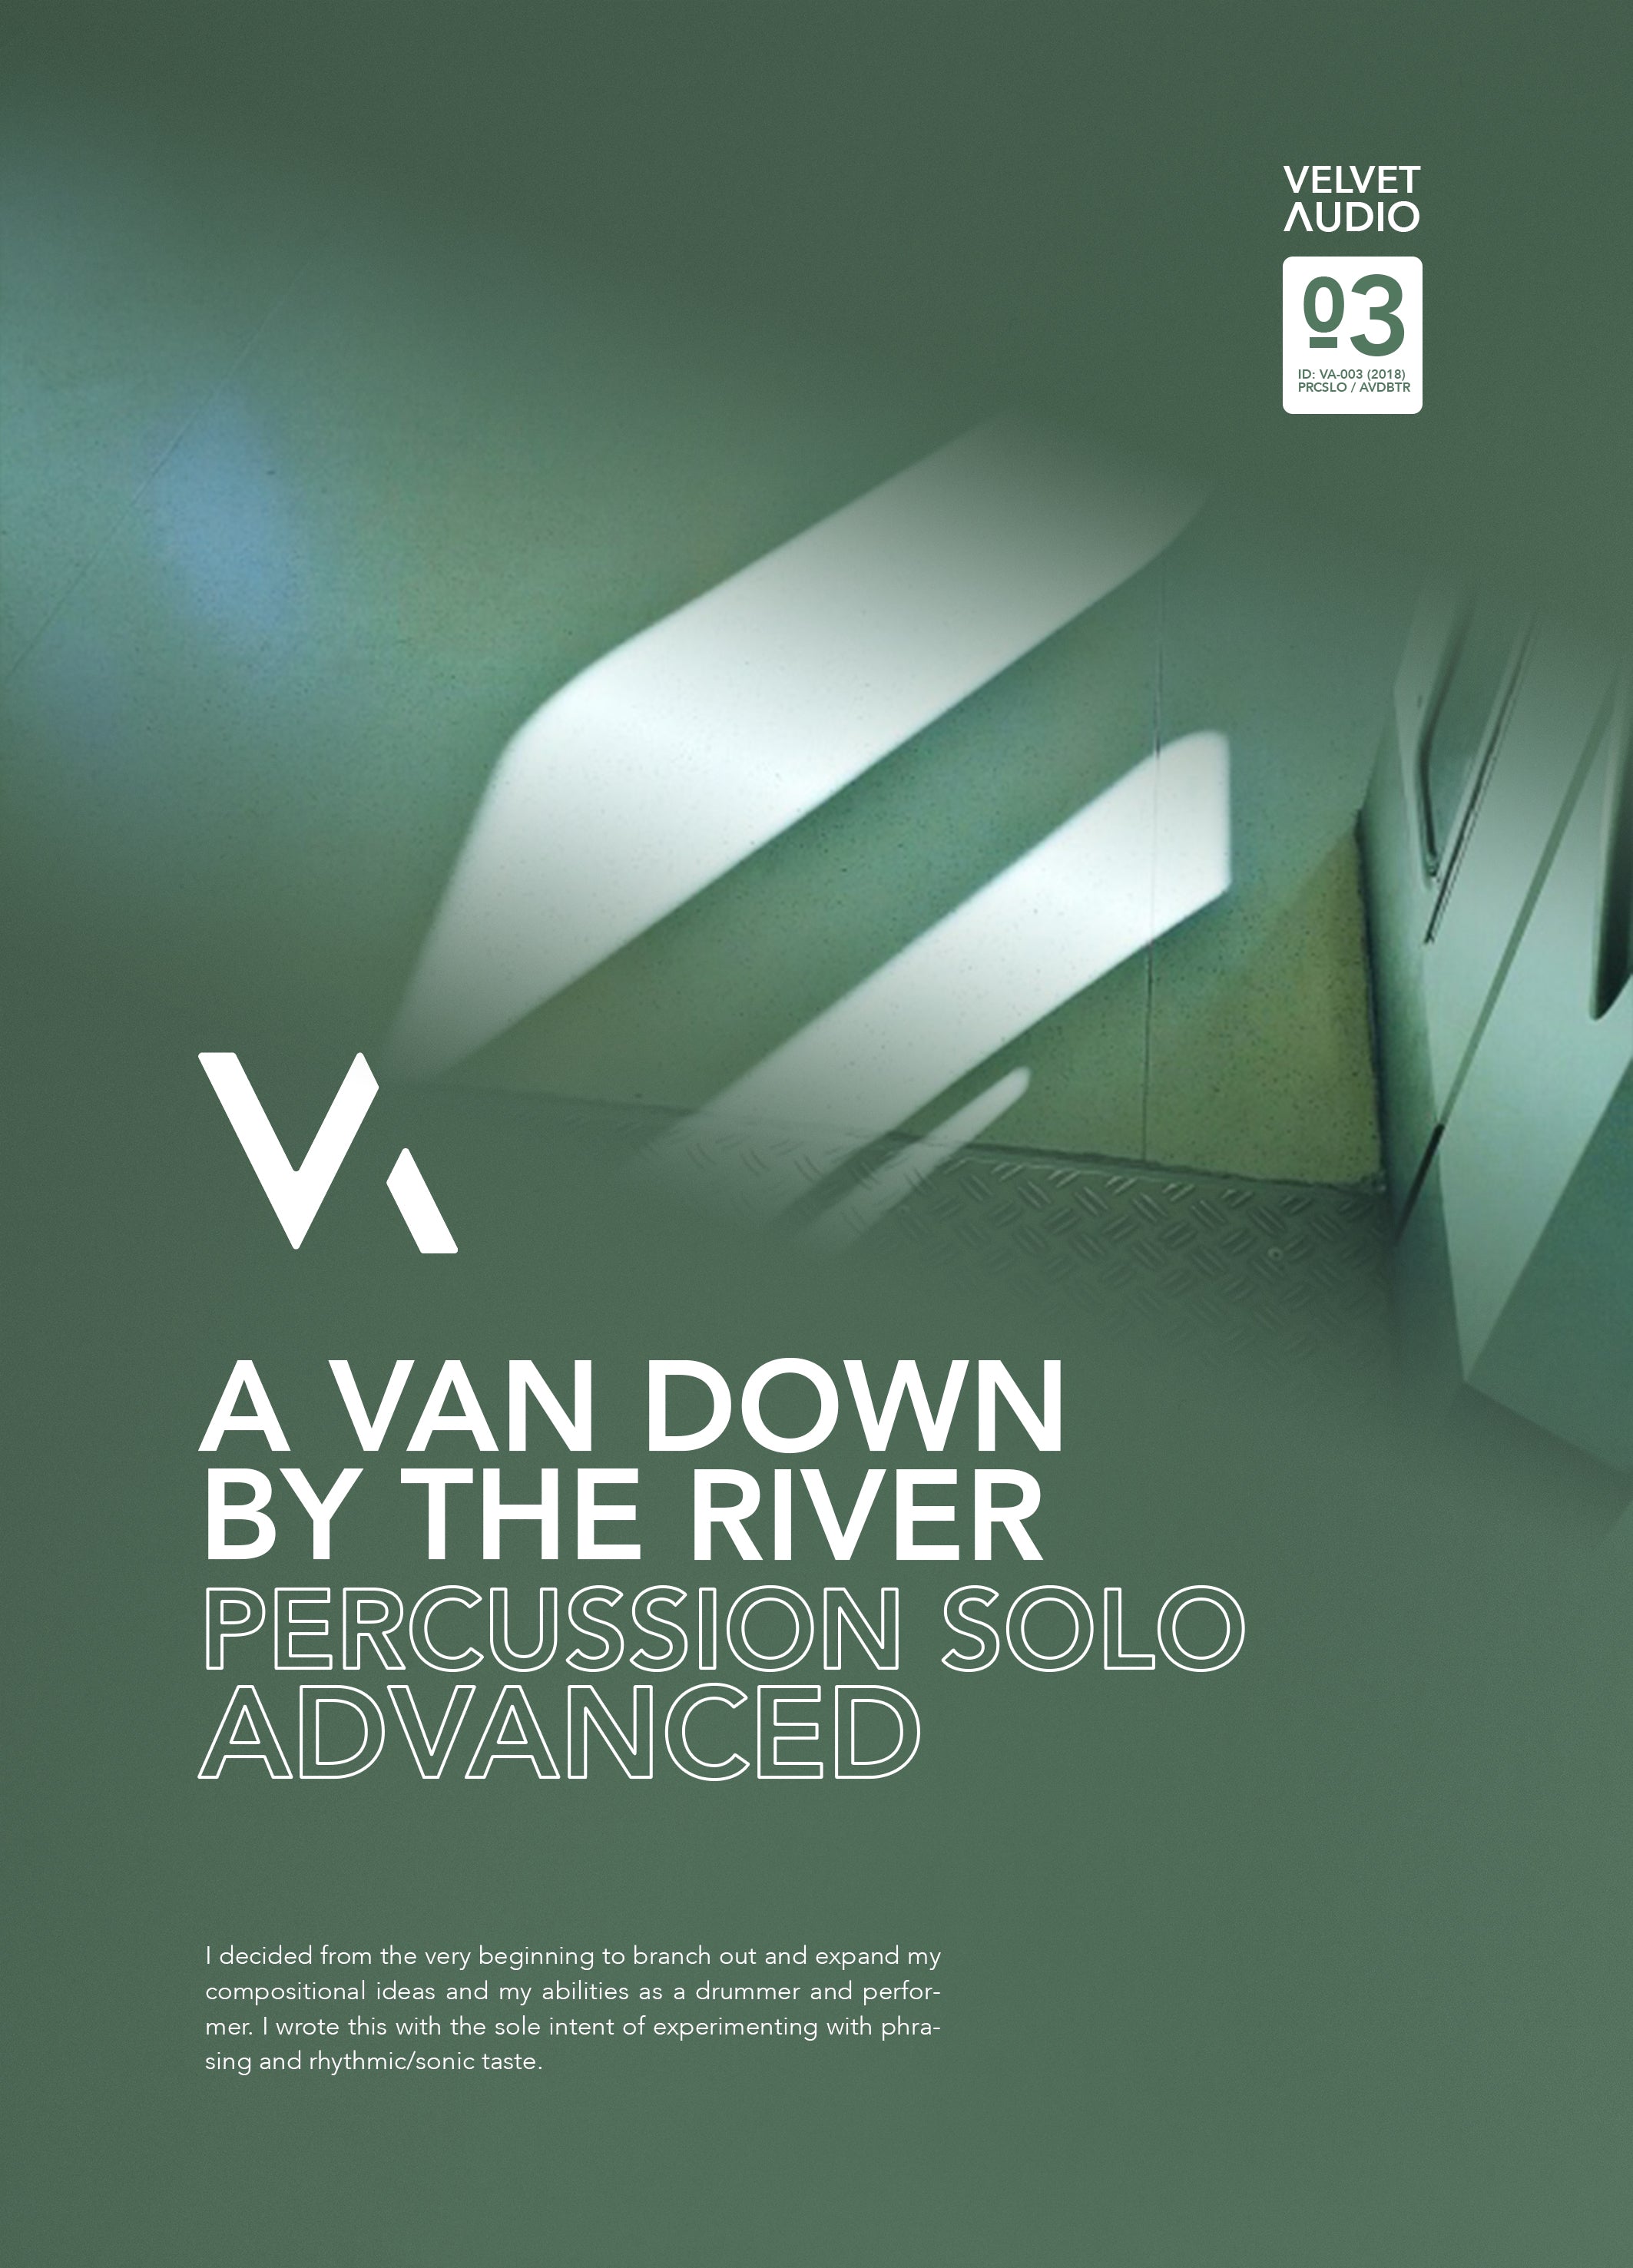 A Van Down by the River